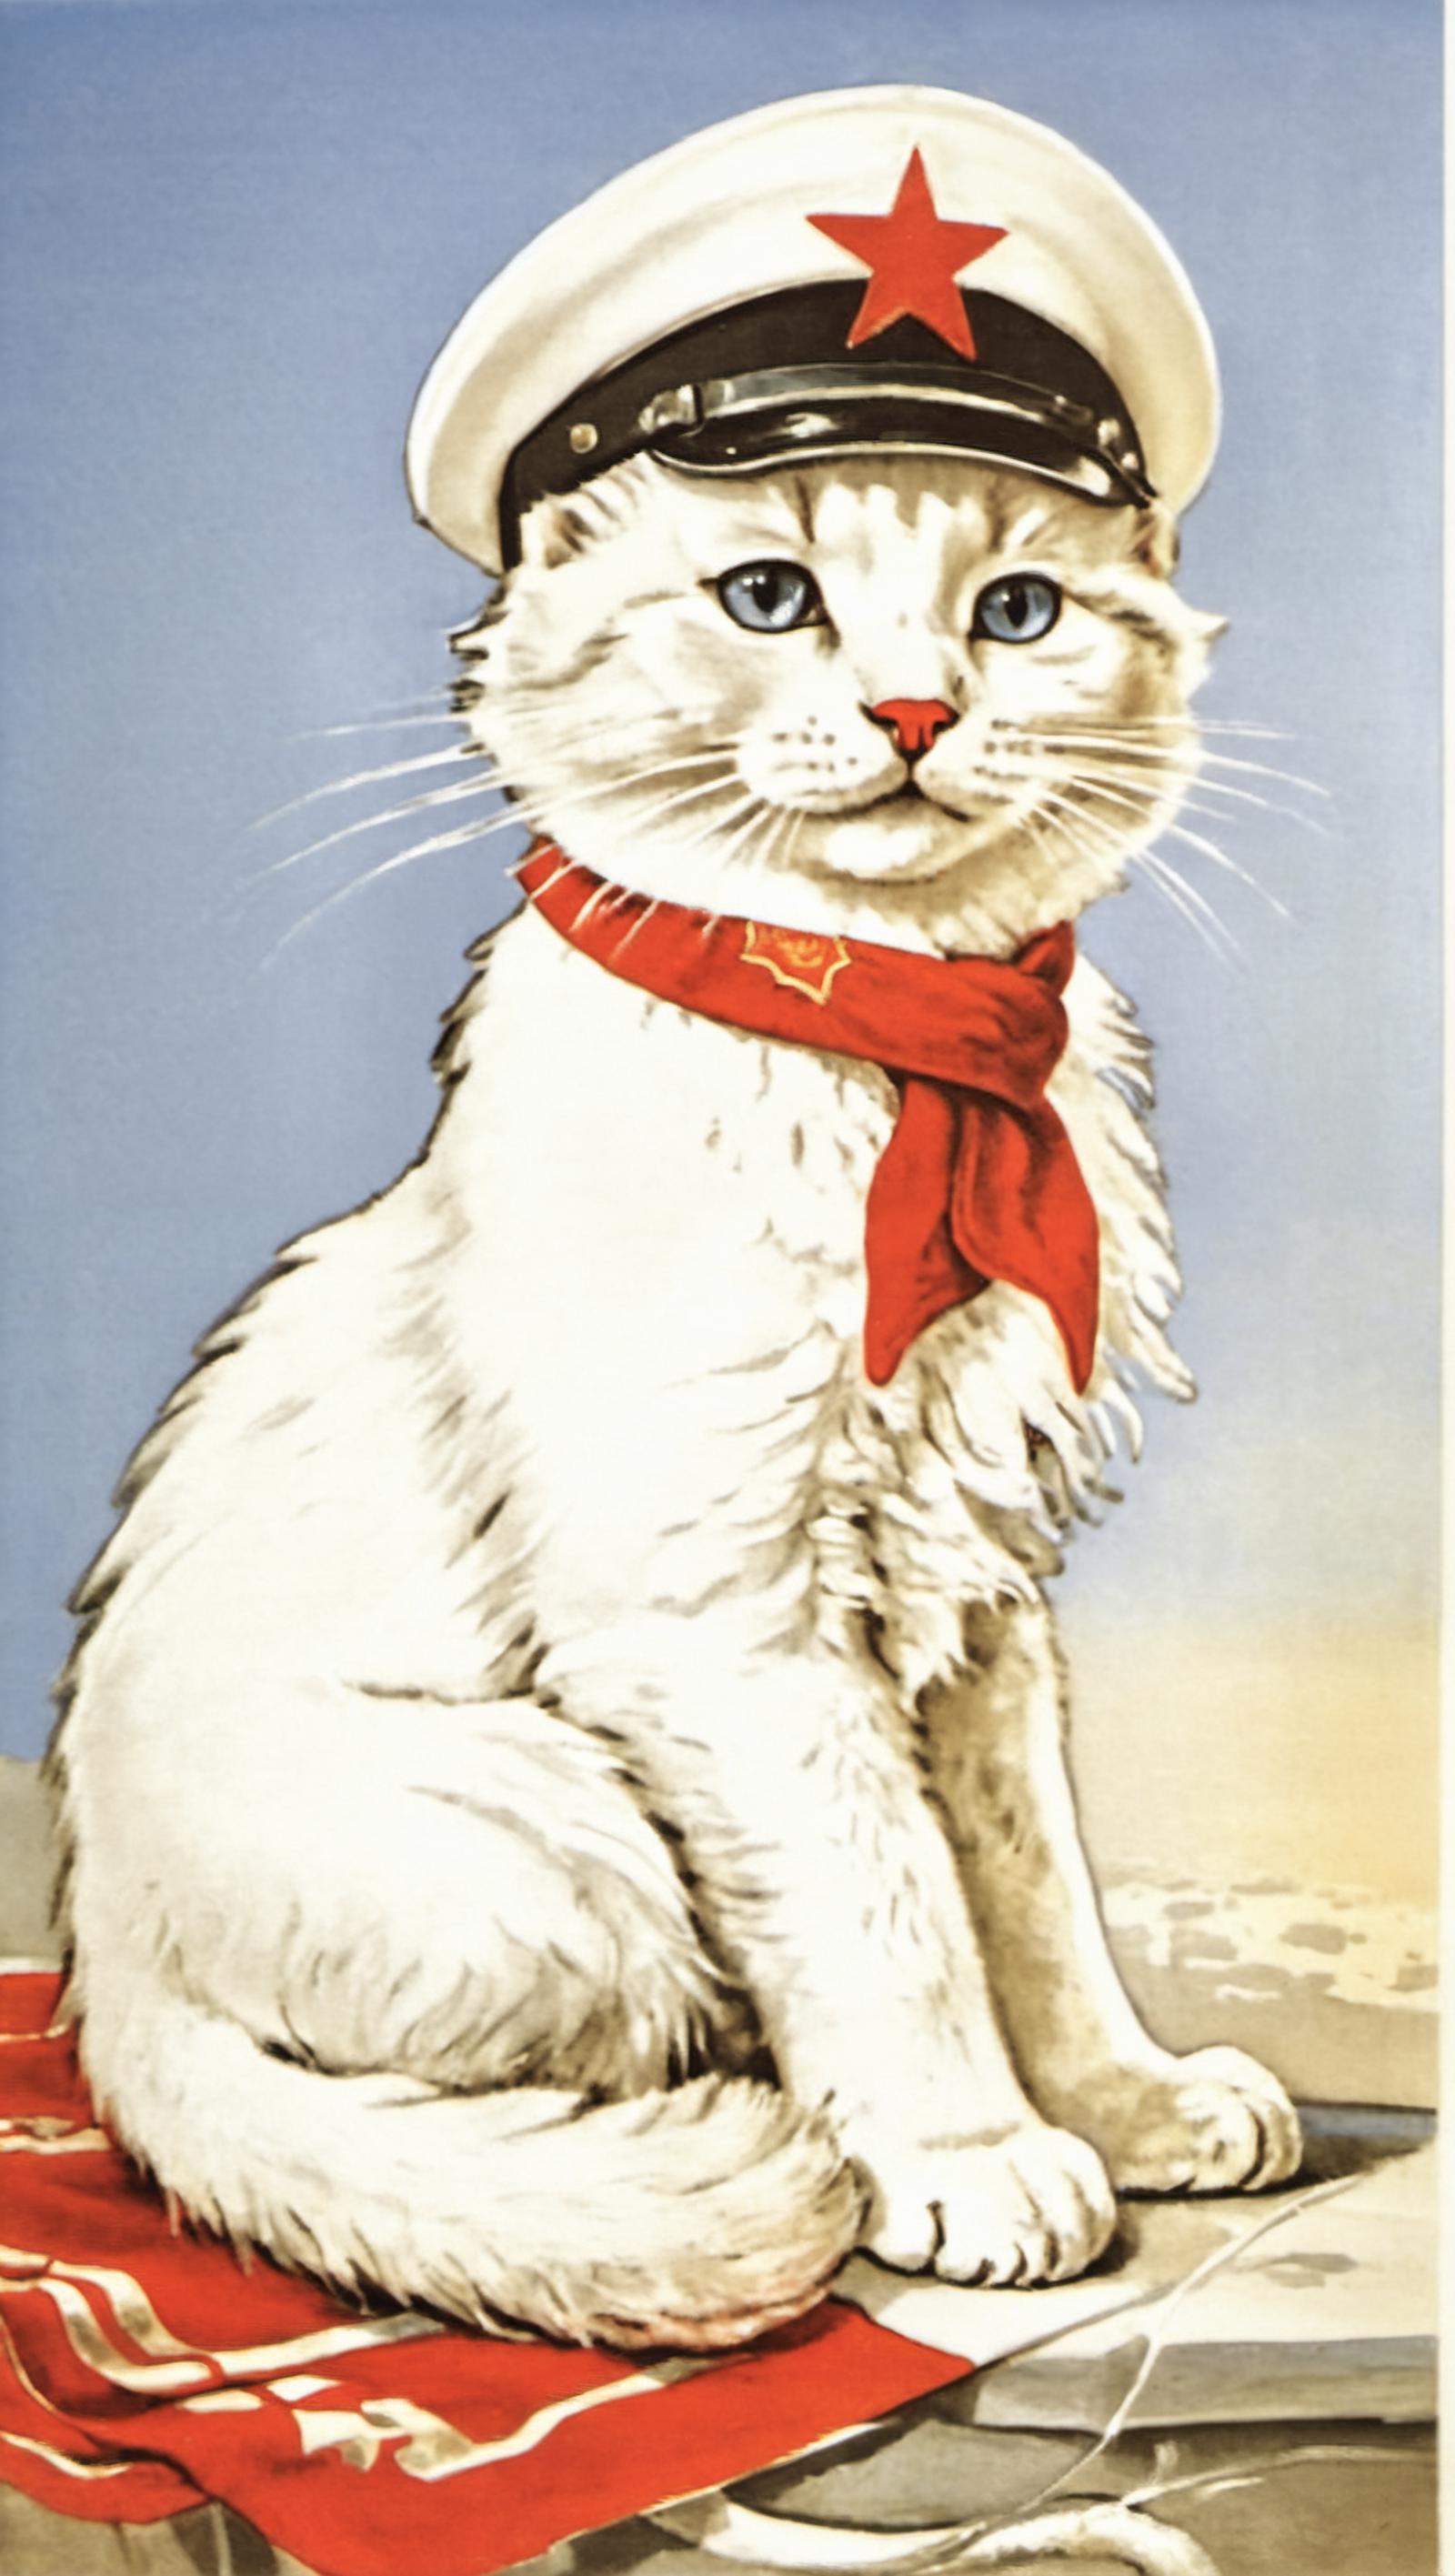 A white cat wearing a red bow tie and sits on the ground.